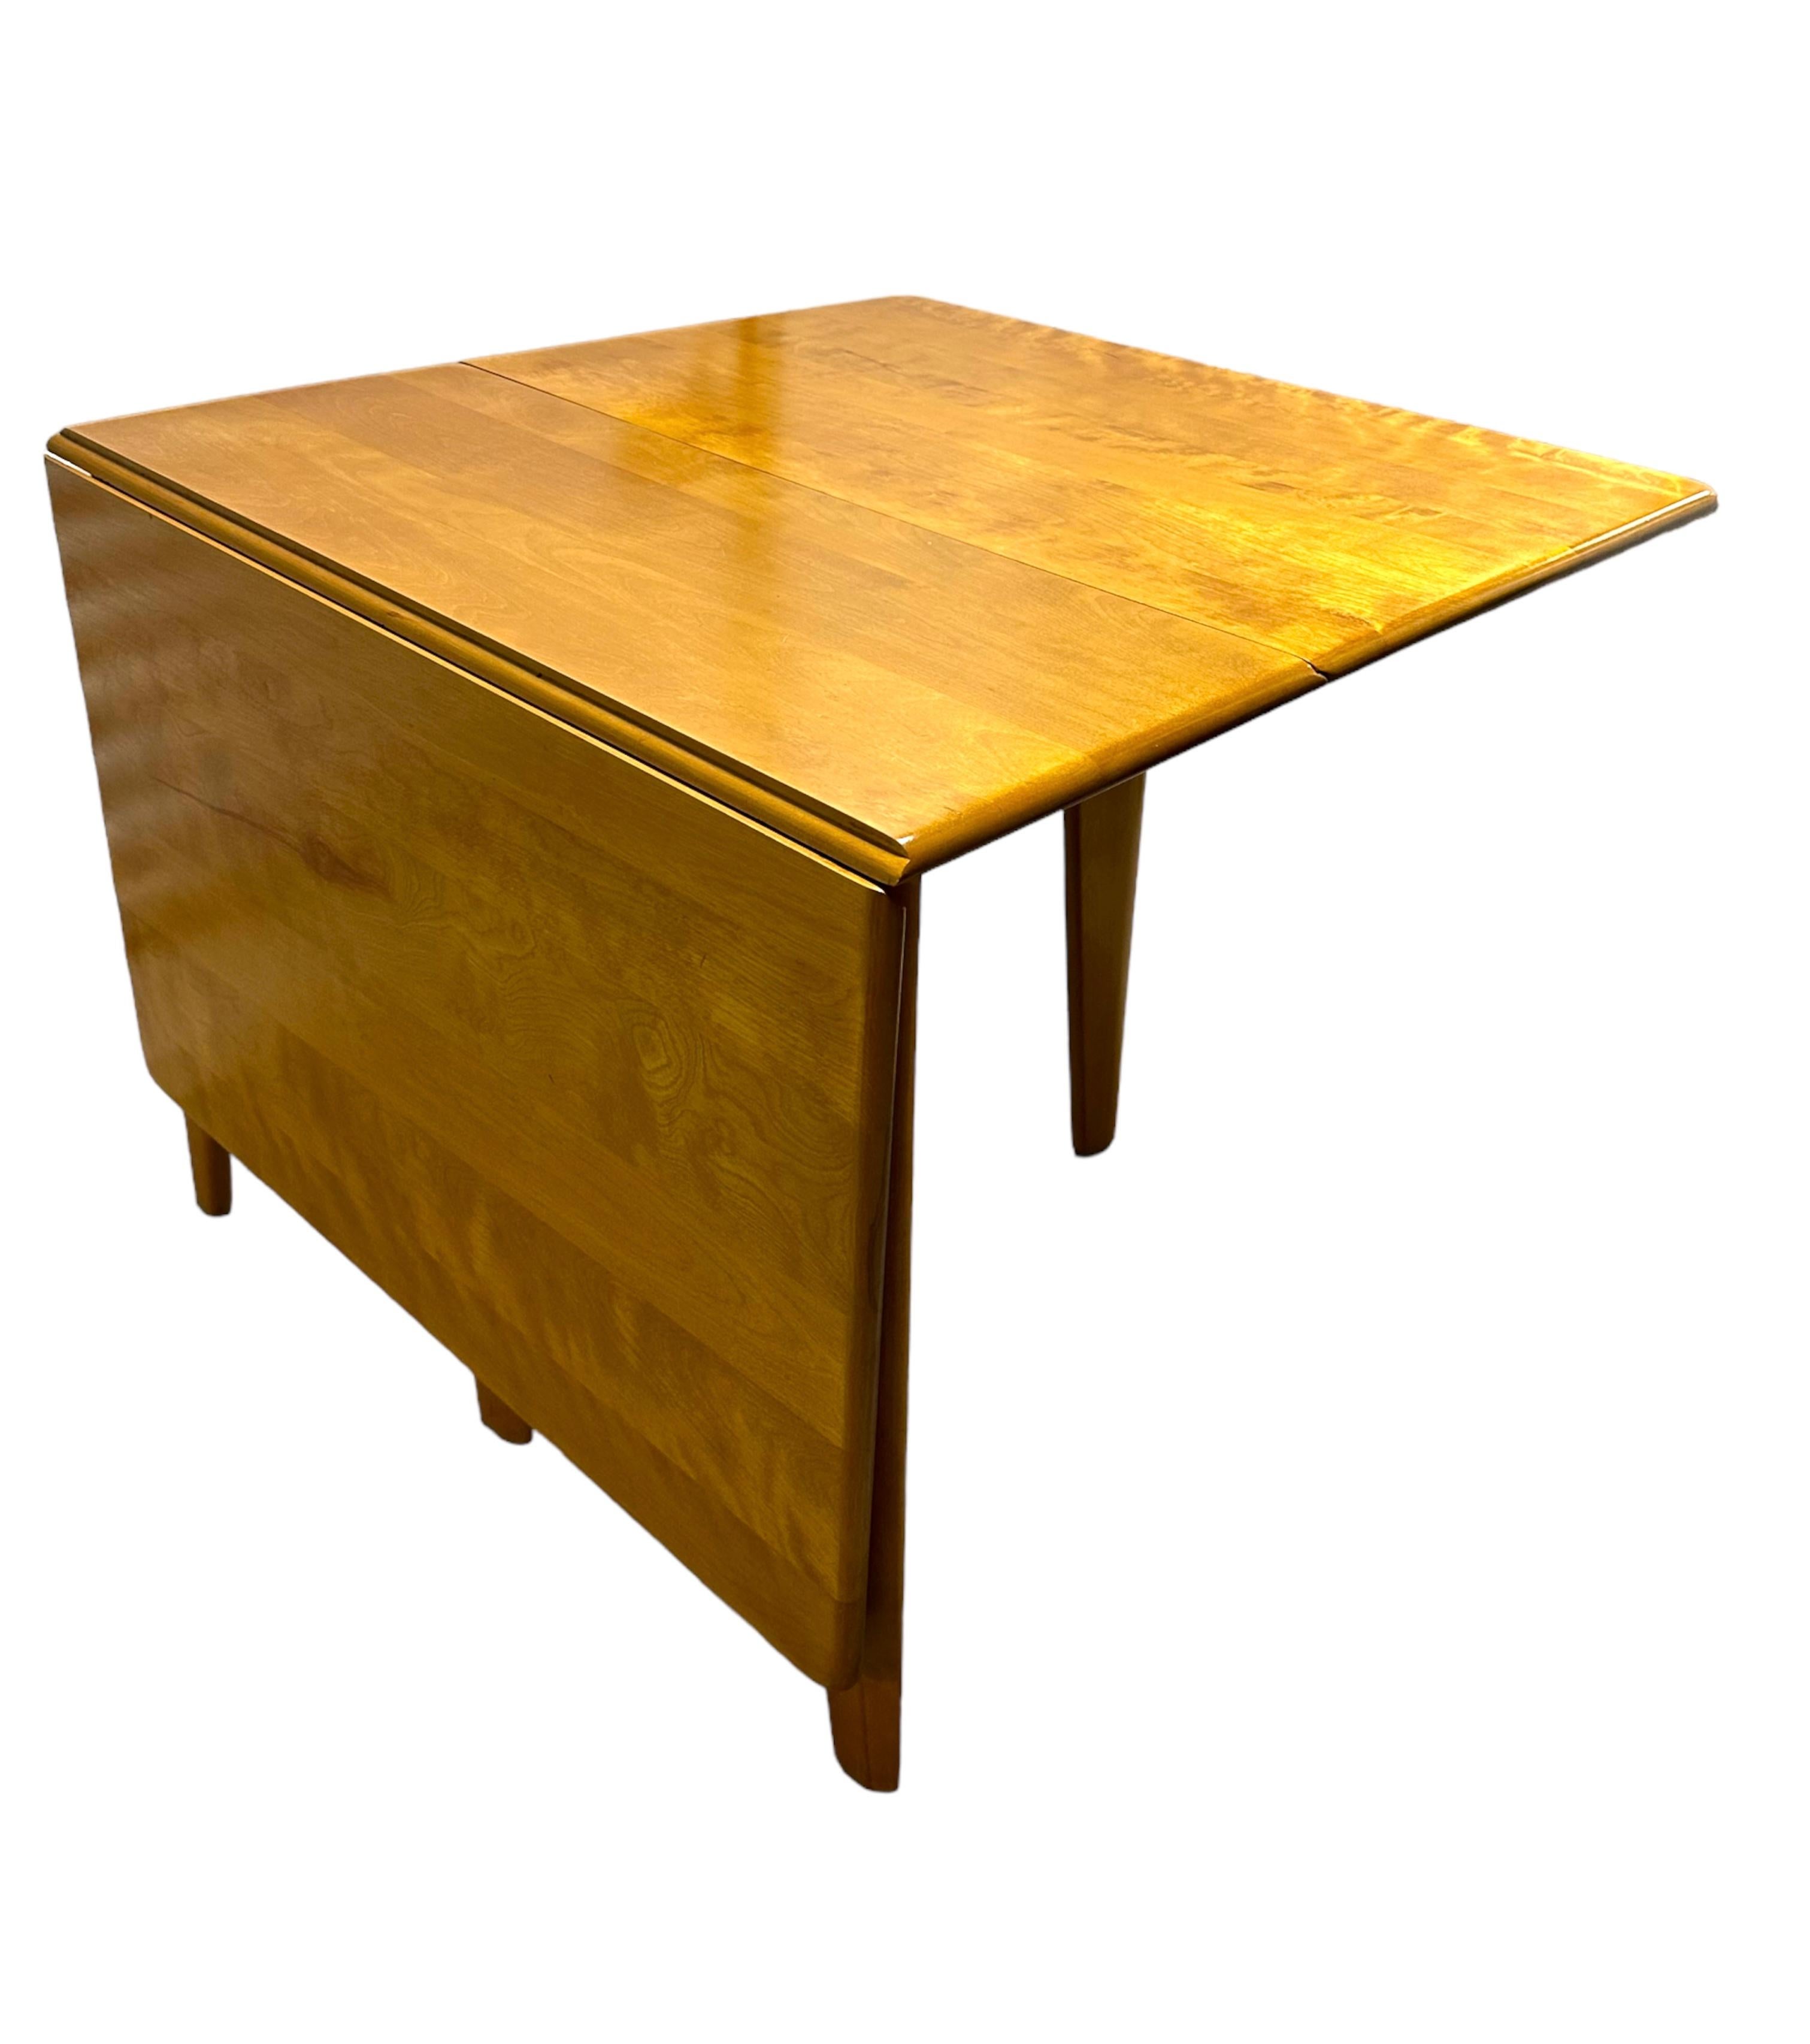 Wonderfully crafted vintage dining table by the iconic Heywood Wakefield. A drop leaf design makes this s highly functional table for small urban home or a small eating area in a large estate, can be used as a desk or visual accent as well. Very